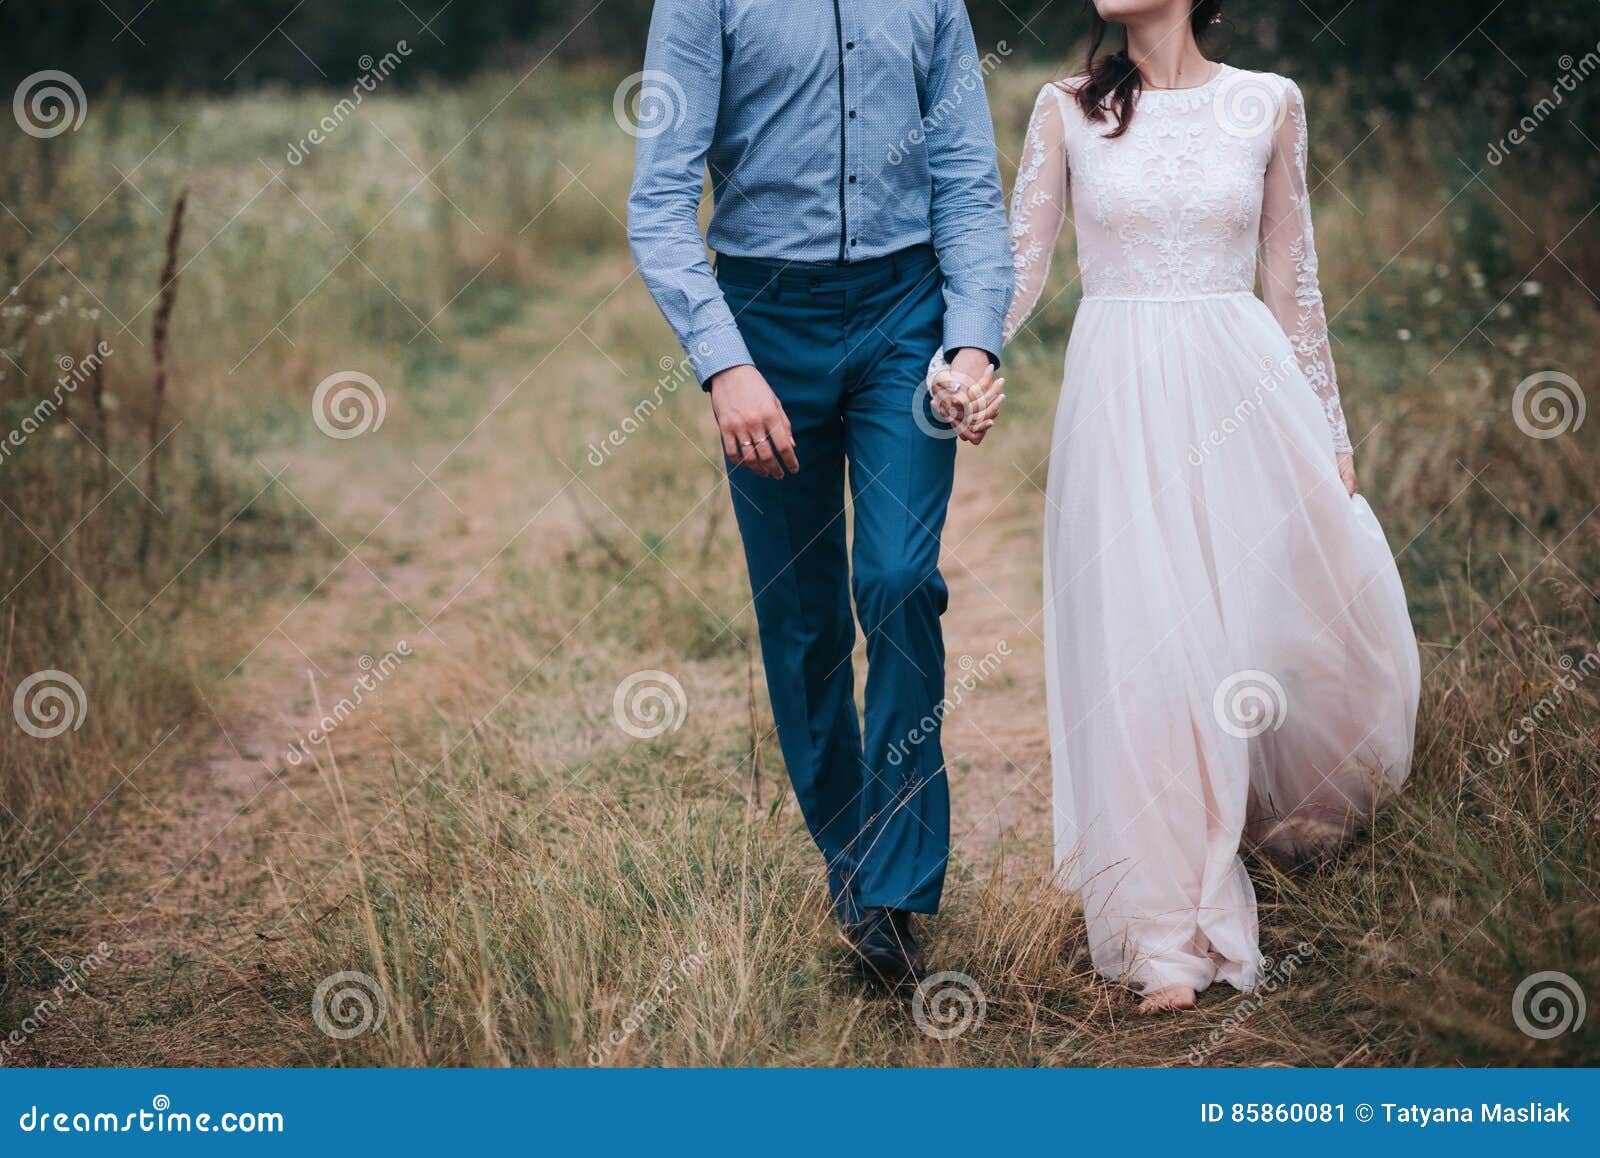 Couple Having A Date Holding Hands And Kissing Or Hugging Stock Image